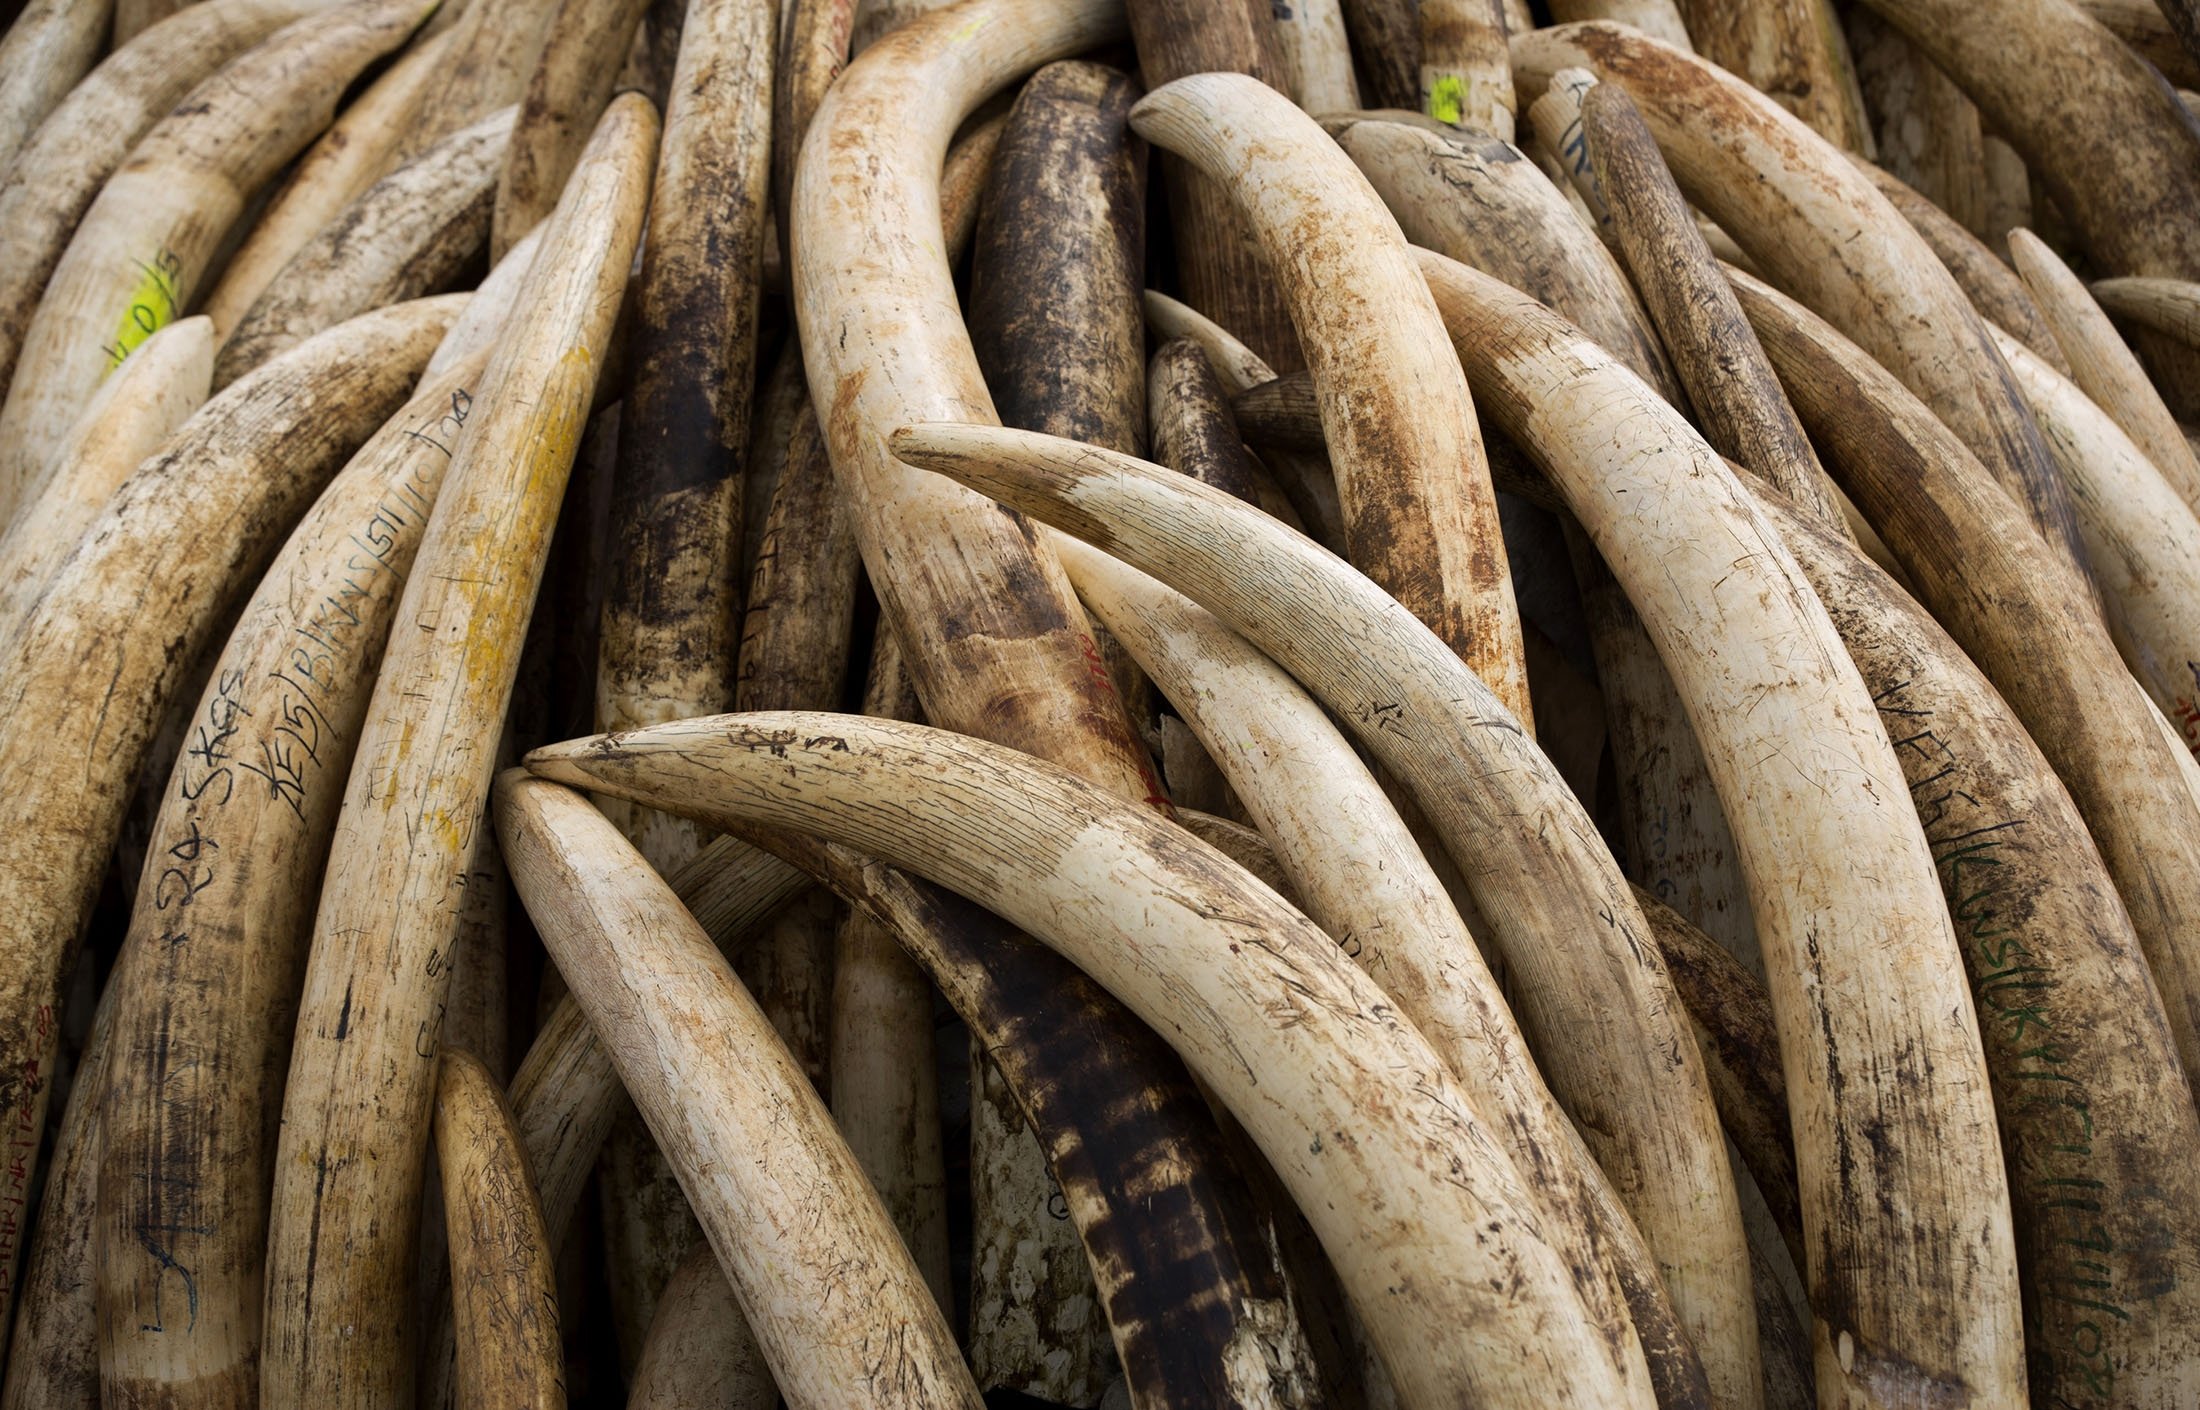 Elephant tusks are stacked in one of around a dozen pyres of ivory, in Nairobi National Park, Kenya, April 28, 2016. (AP Photo)